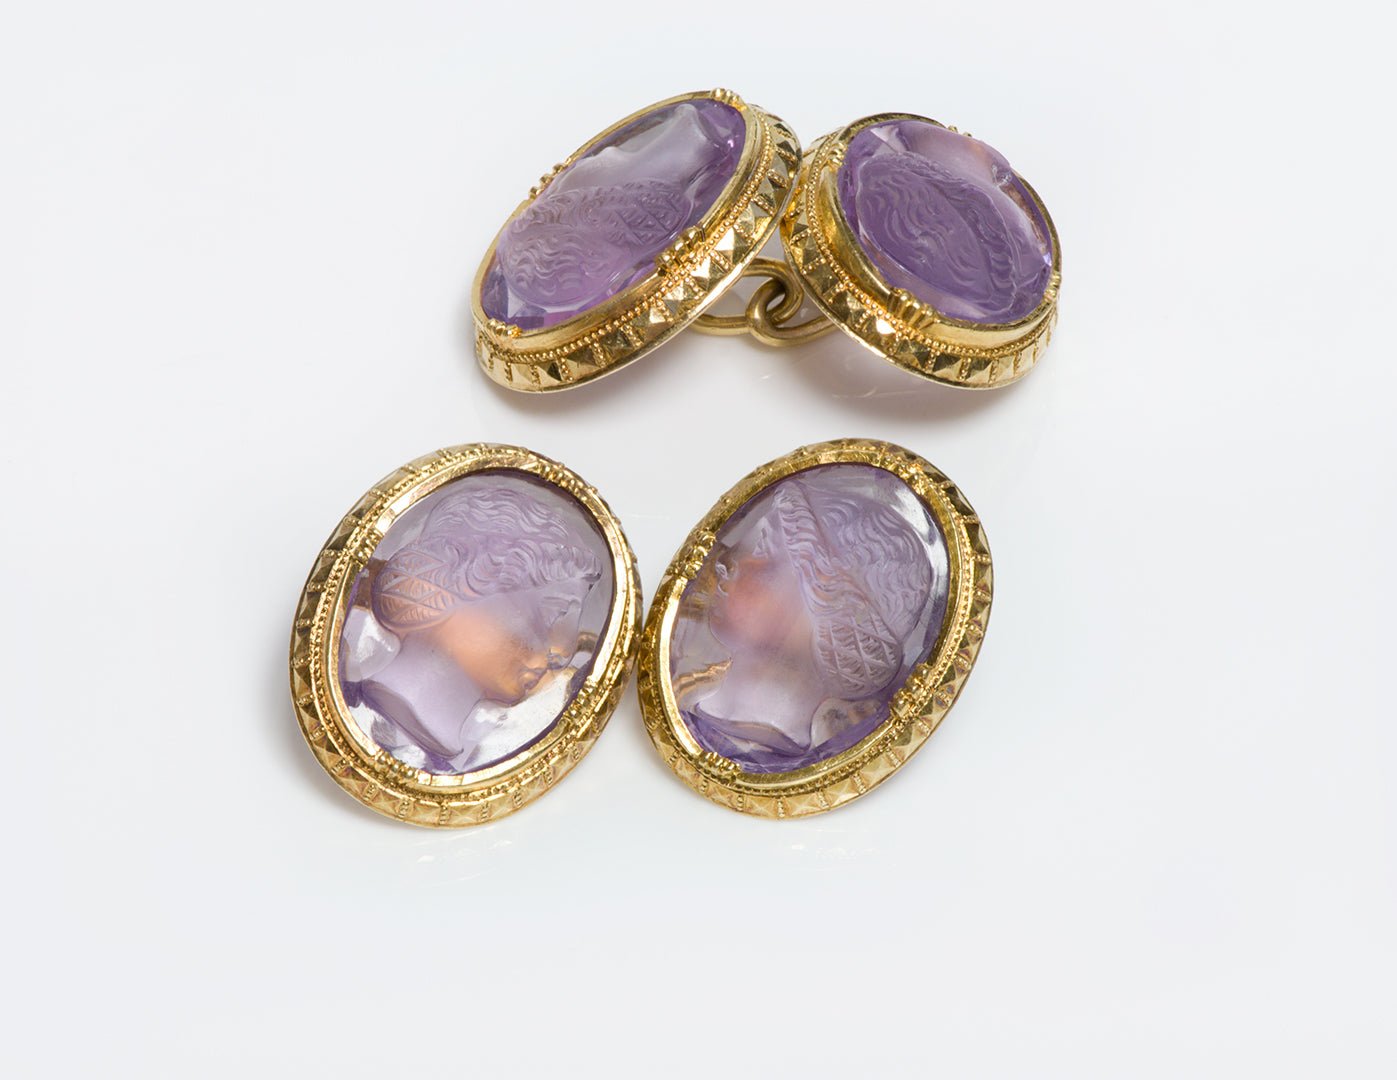 Antique Gold Amethyst Cameo Cufflinks - DSF Antique Jewelry